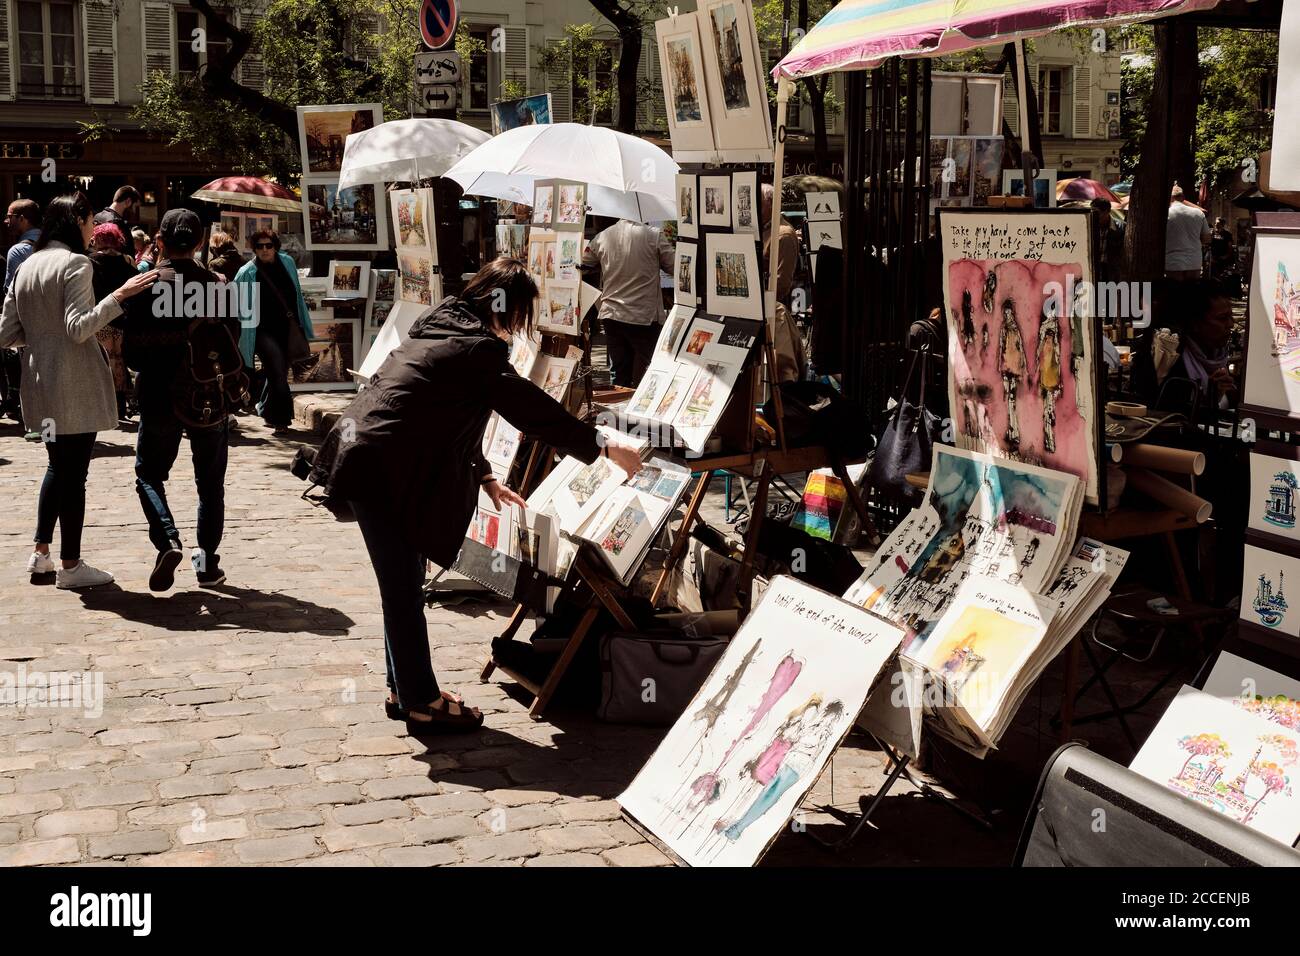 Europe, France, Paris, Montmartre, Artists painting and selling artworks on street, Woman looking at pictures Stock Photo